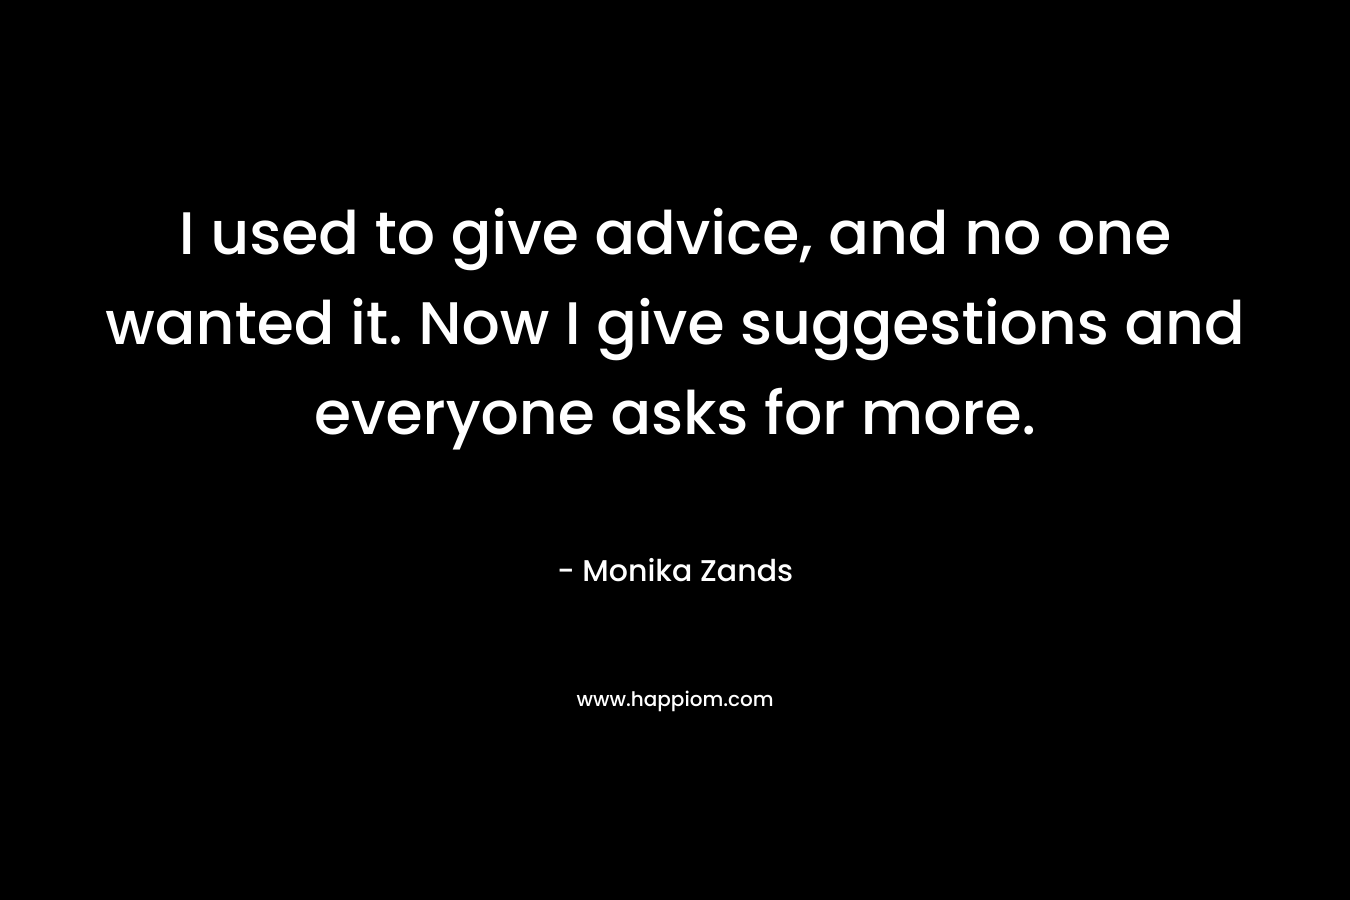 I used to give advice, and no one wanted it. Now I give suggestions and everyone asks for more.